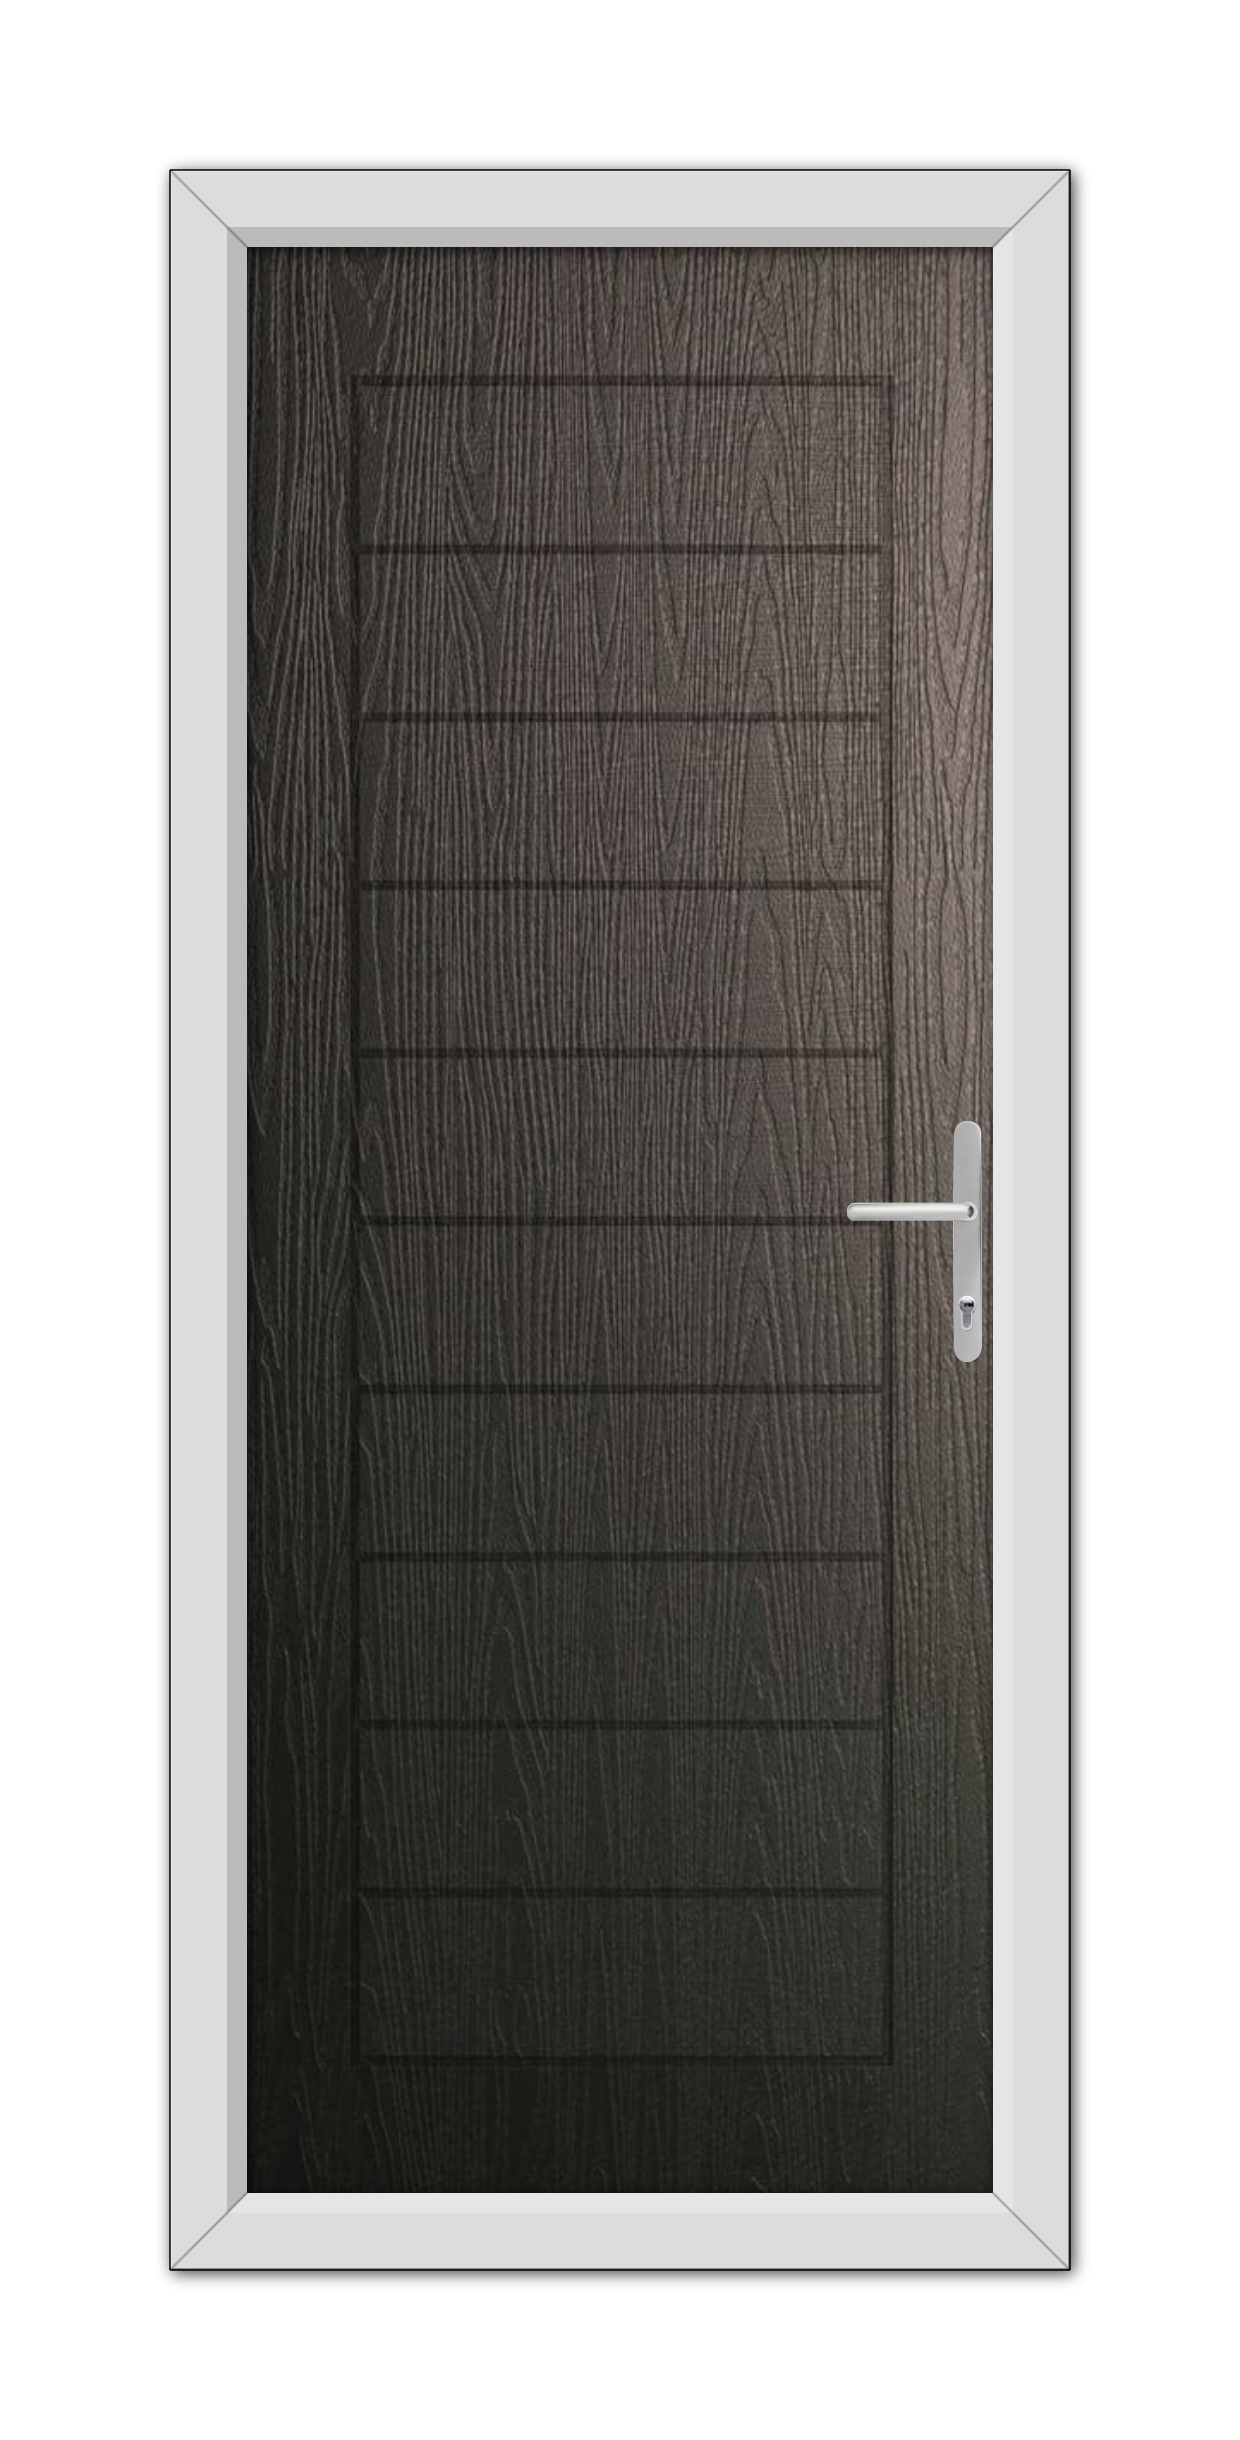 A modern Schwarzbraun Cambridge Composite Door 48mm Timber Core with textured surface and a silver handle, framed within a white door frame against a white background.